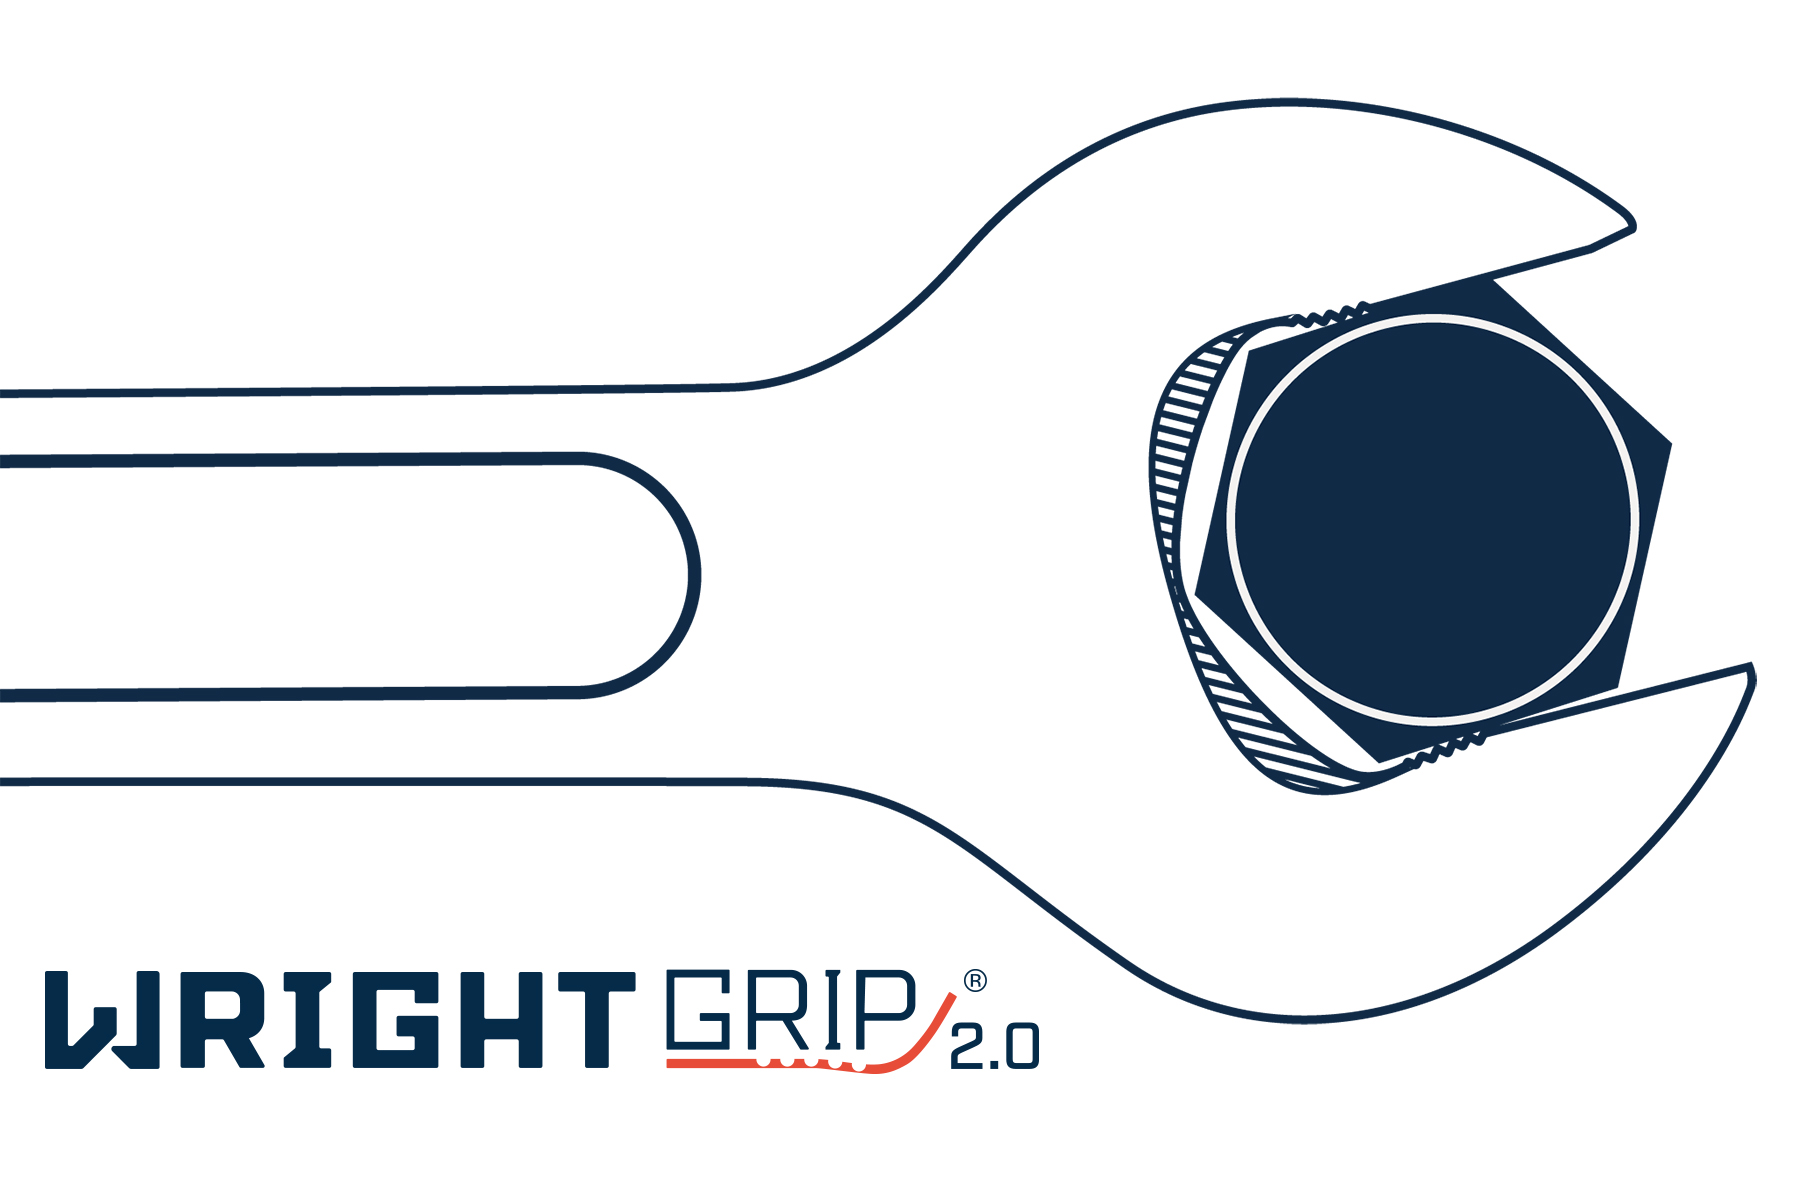 Wright Offers Innovative Wright Grip 2.0 Wrench Design